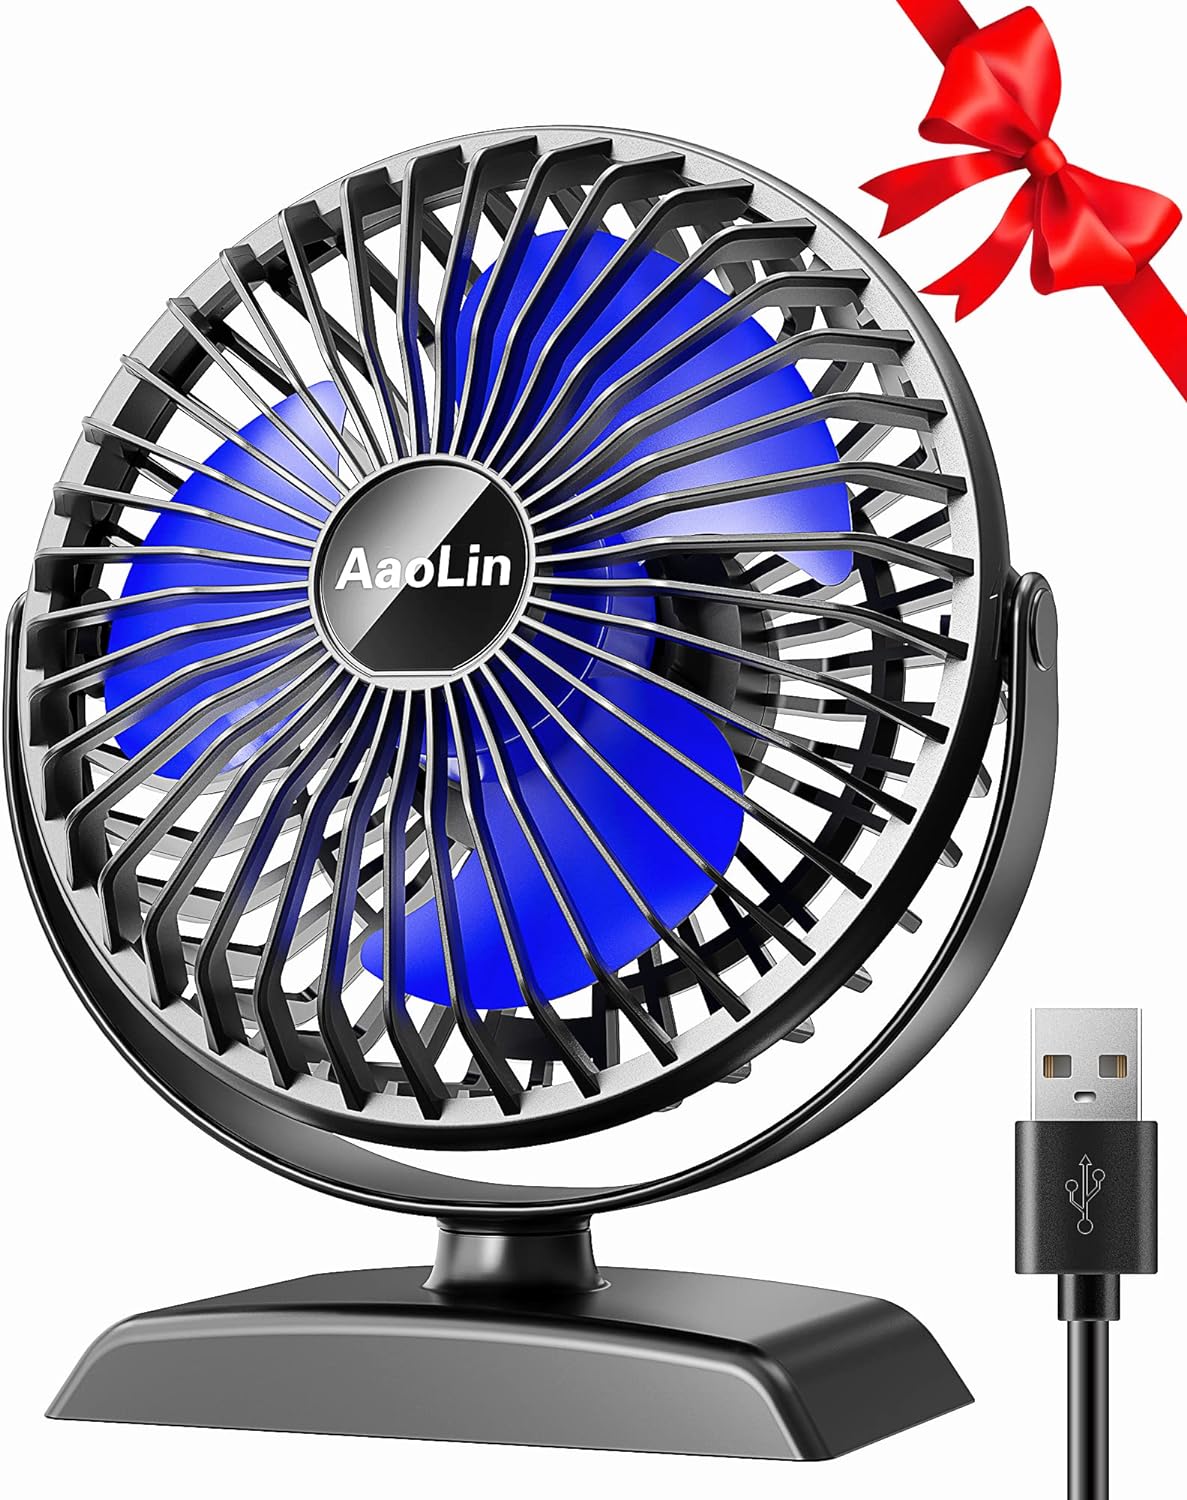 AaoLin Desk Fan, USB Small Fans with 3 Speeds Strong Airflow, Quiet Portable, 360° Rotation Personal Table Fan for Home,Office, Bedroom Desktop